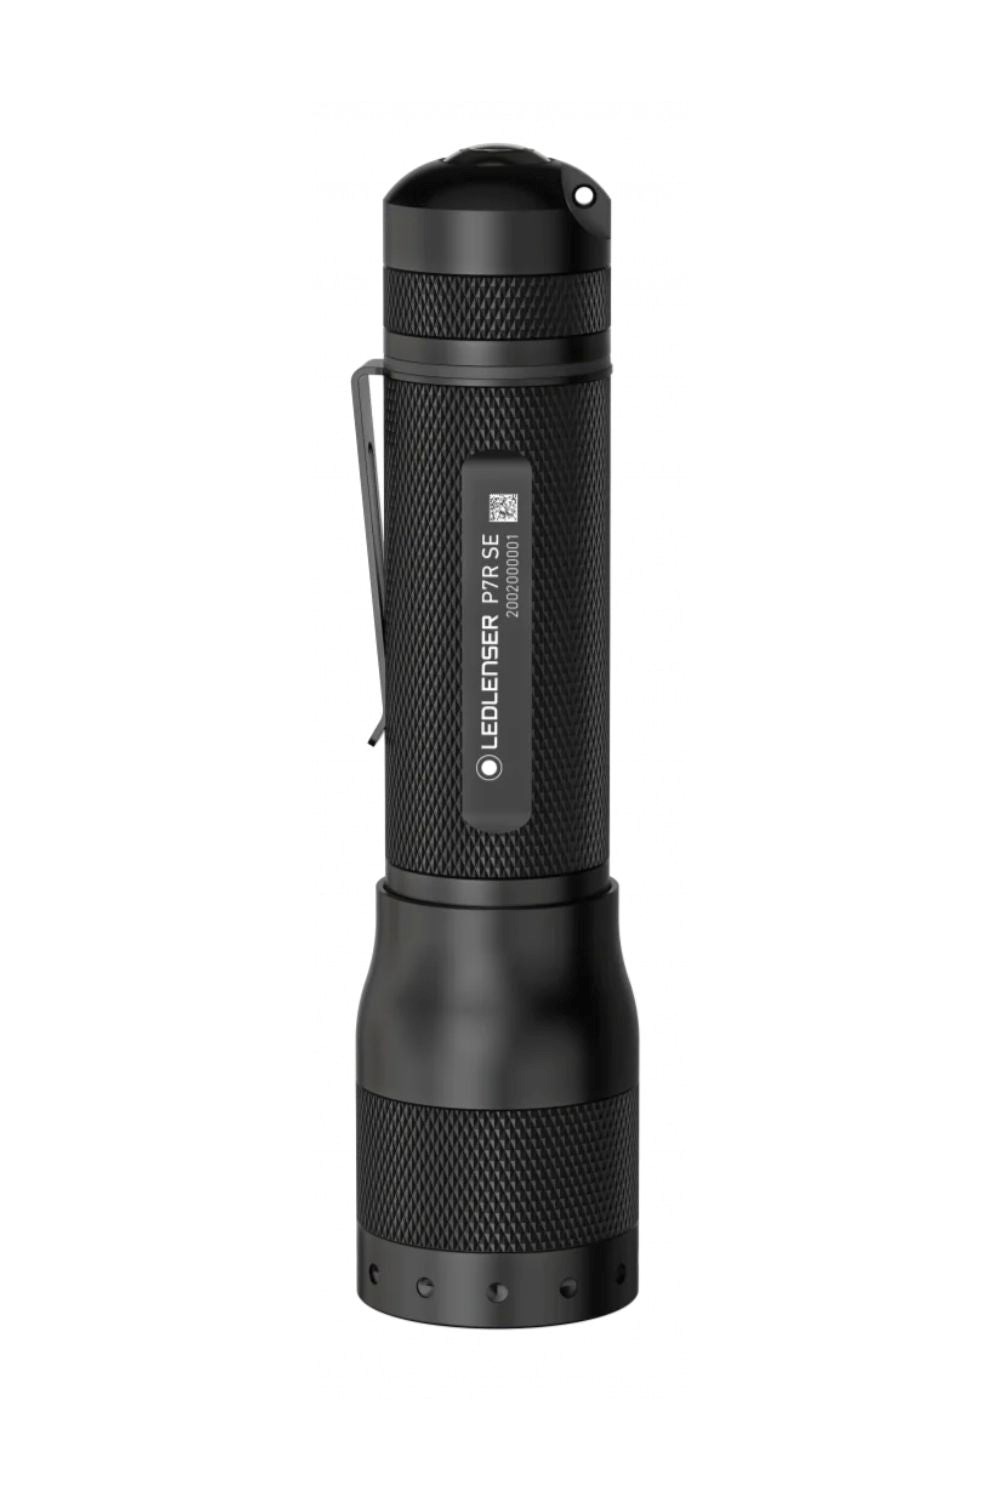 Led Lenser 880003 P7 High-Performance Tactical Flashlight with Speed Focus